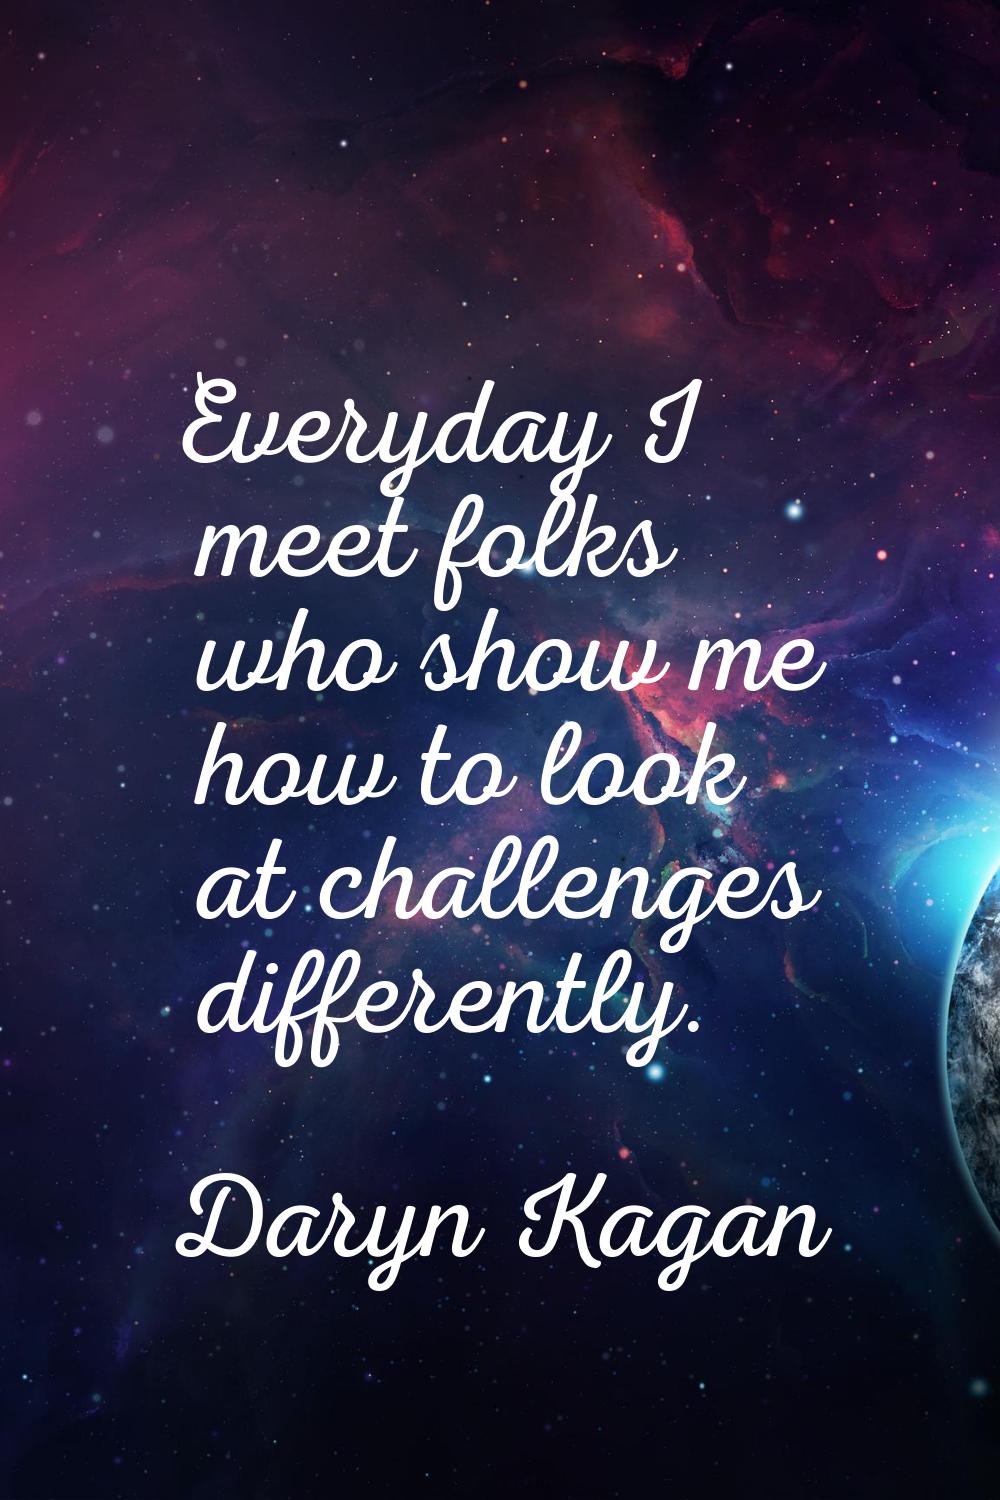 Everyday I meet folks who show me how to look at challenges differently.